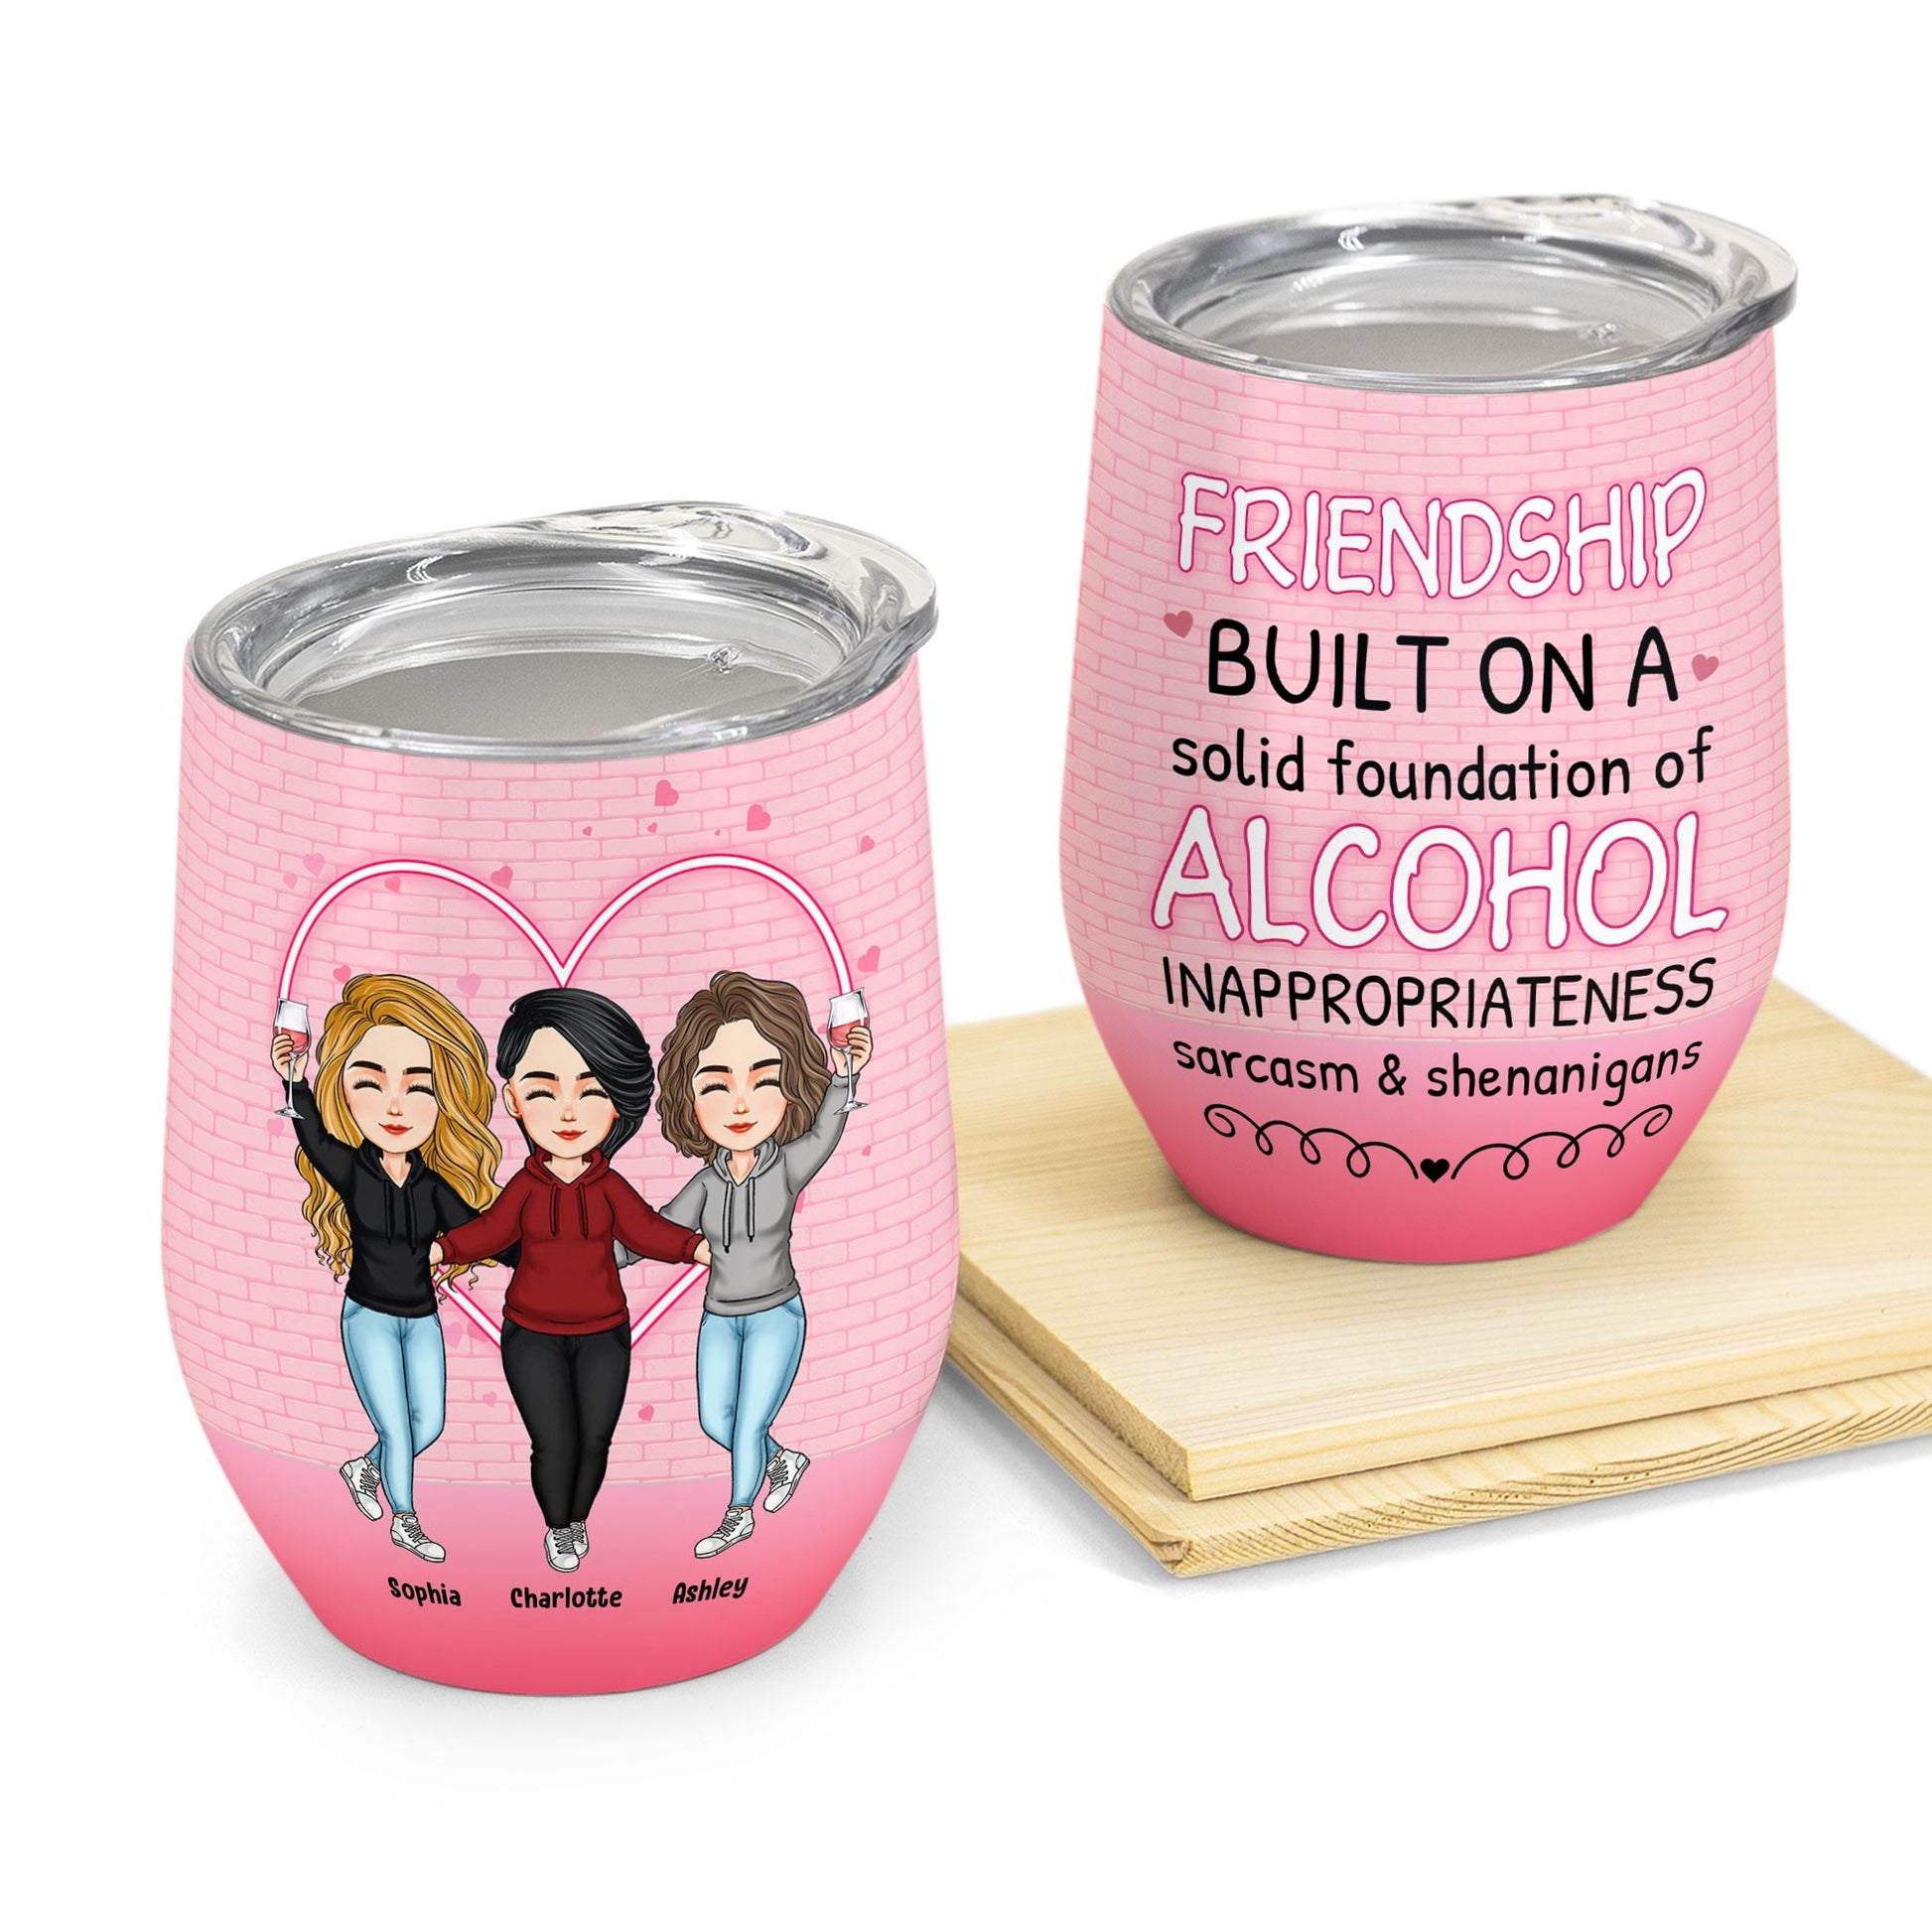 Orange Poi Personalized Best Friend Tumbler Here's To Another Year Of  Bonding Over Alcohol Tumbler,Y…See more Orange Poi Personalized Best Friend